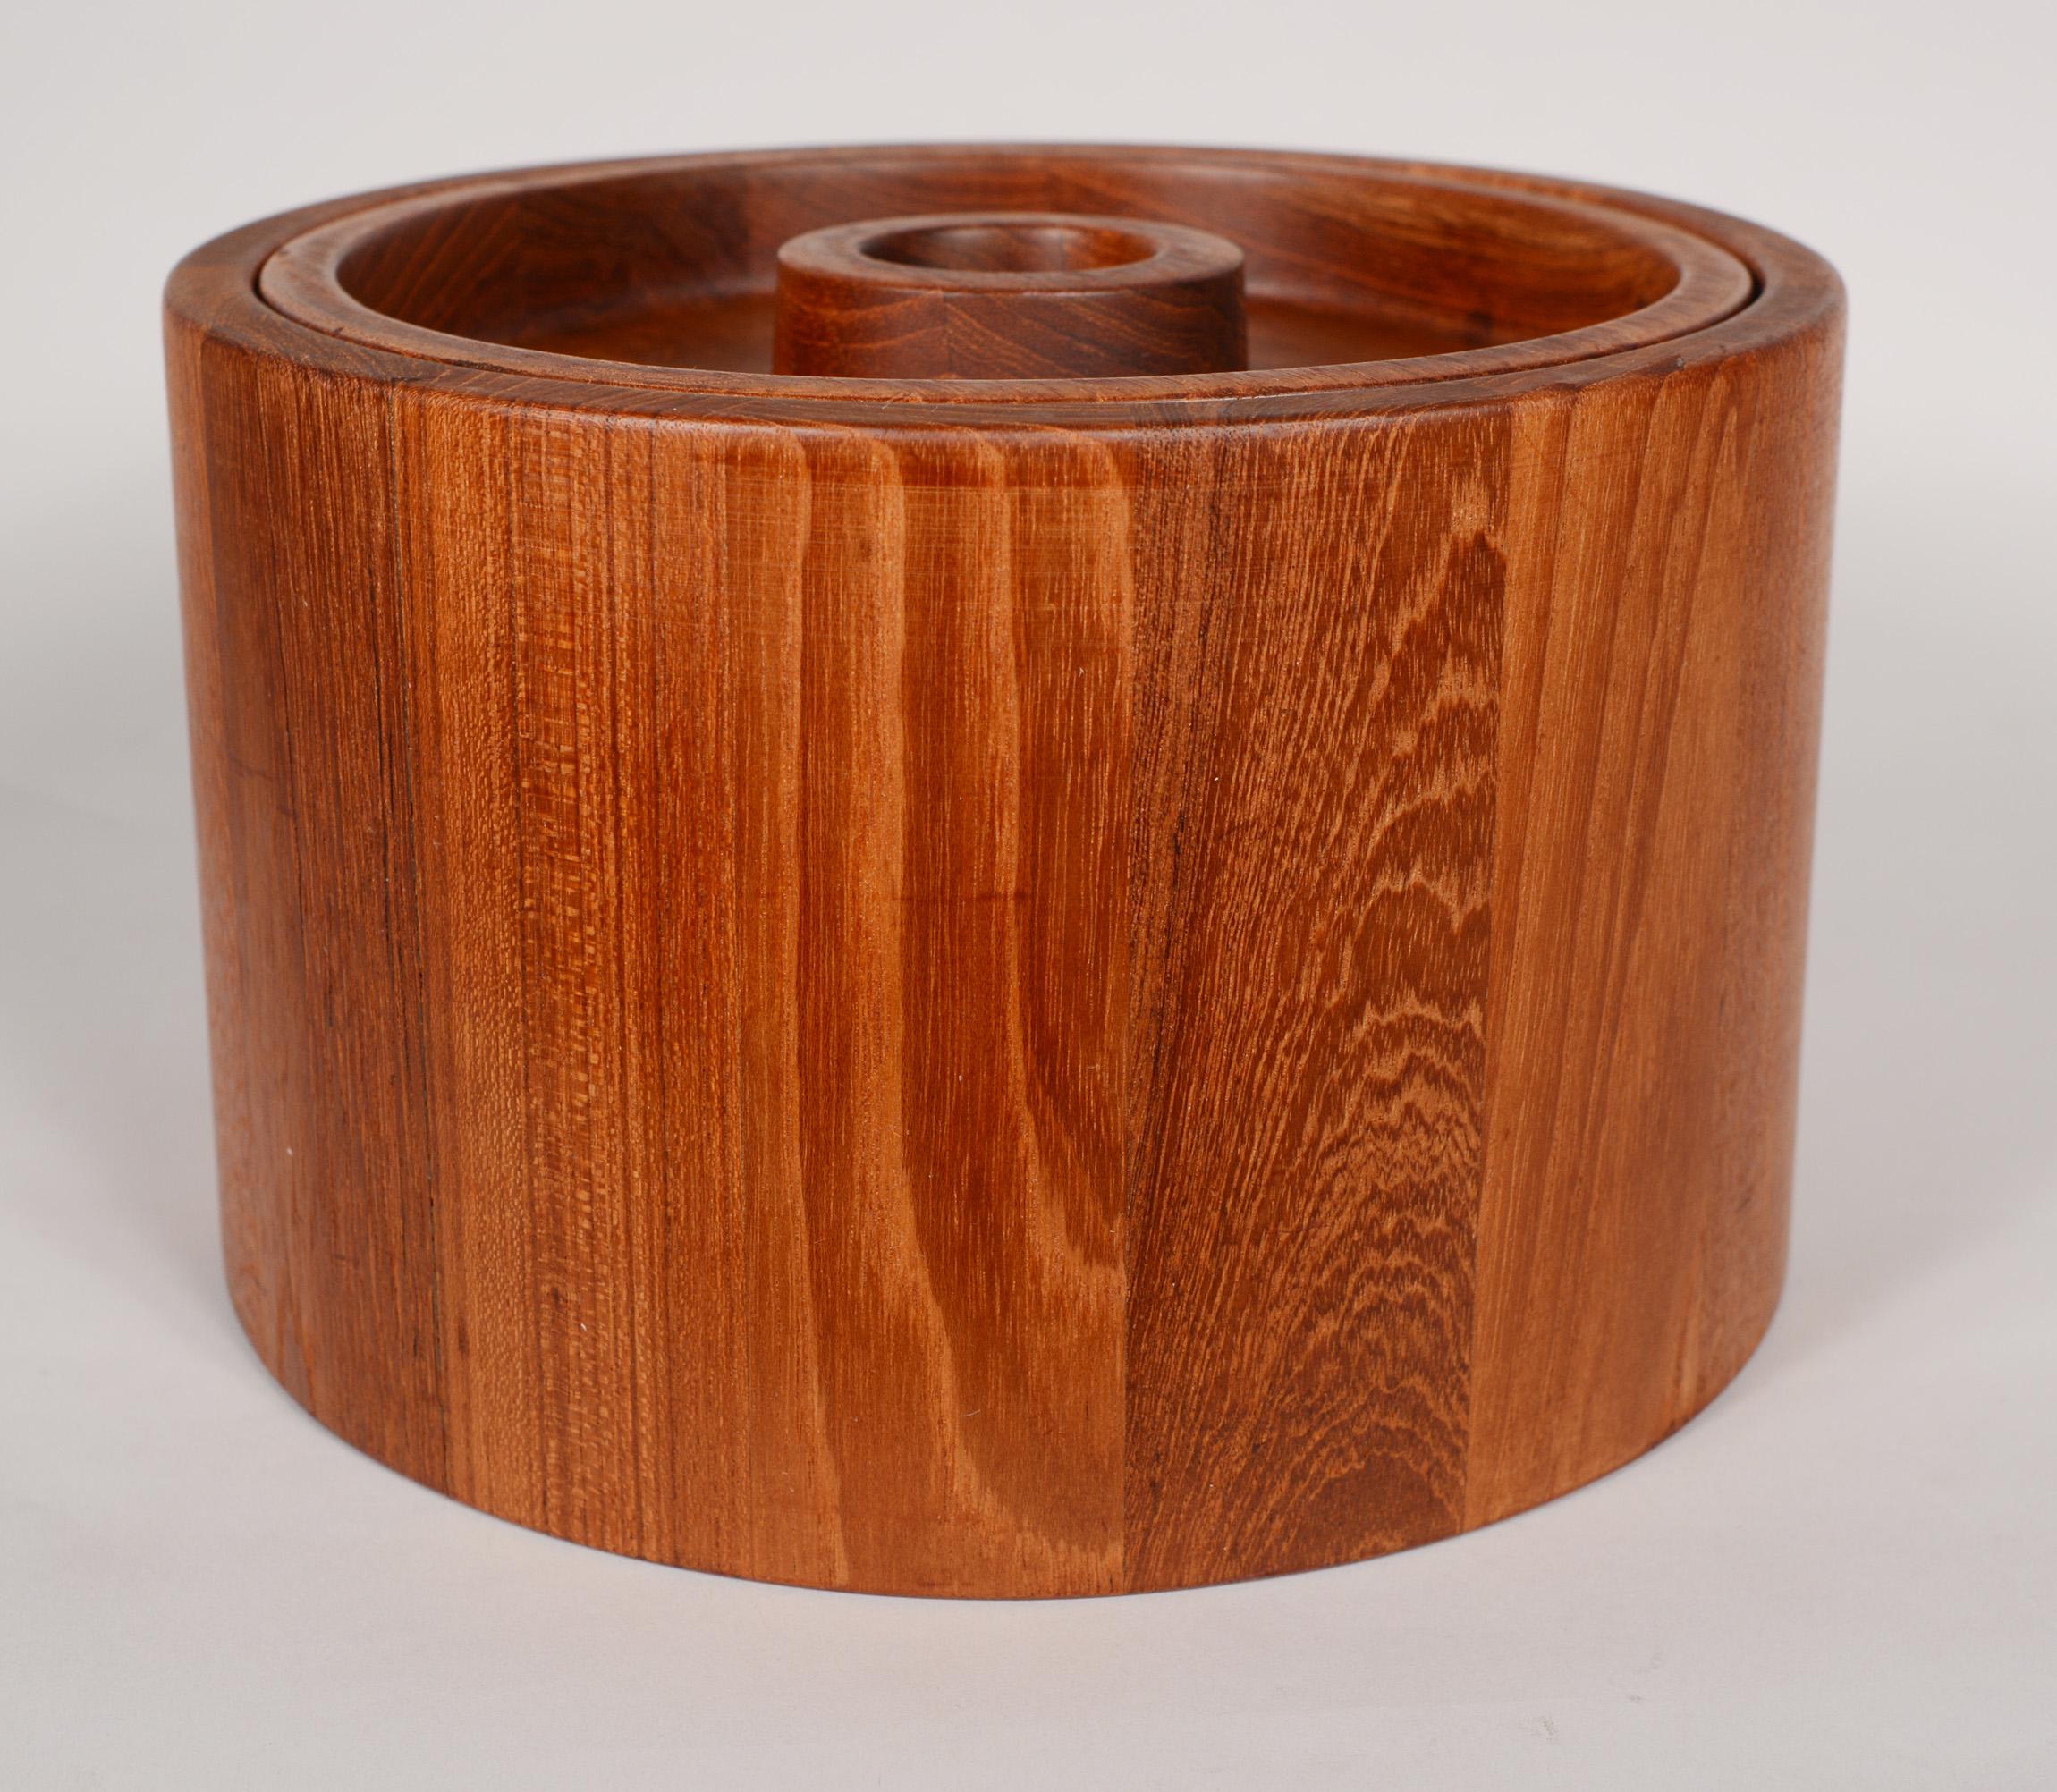 Staved teak ice bucket designed by Jens Quistgaard for Dansk Designs. This ice bucket is slightly tapered and has a recessed lid.